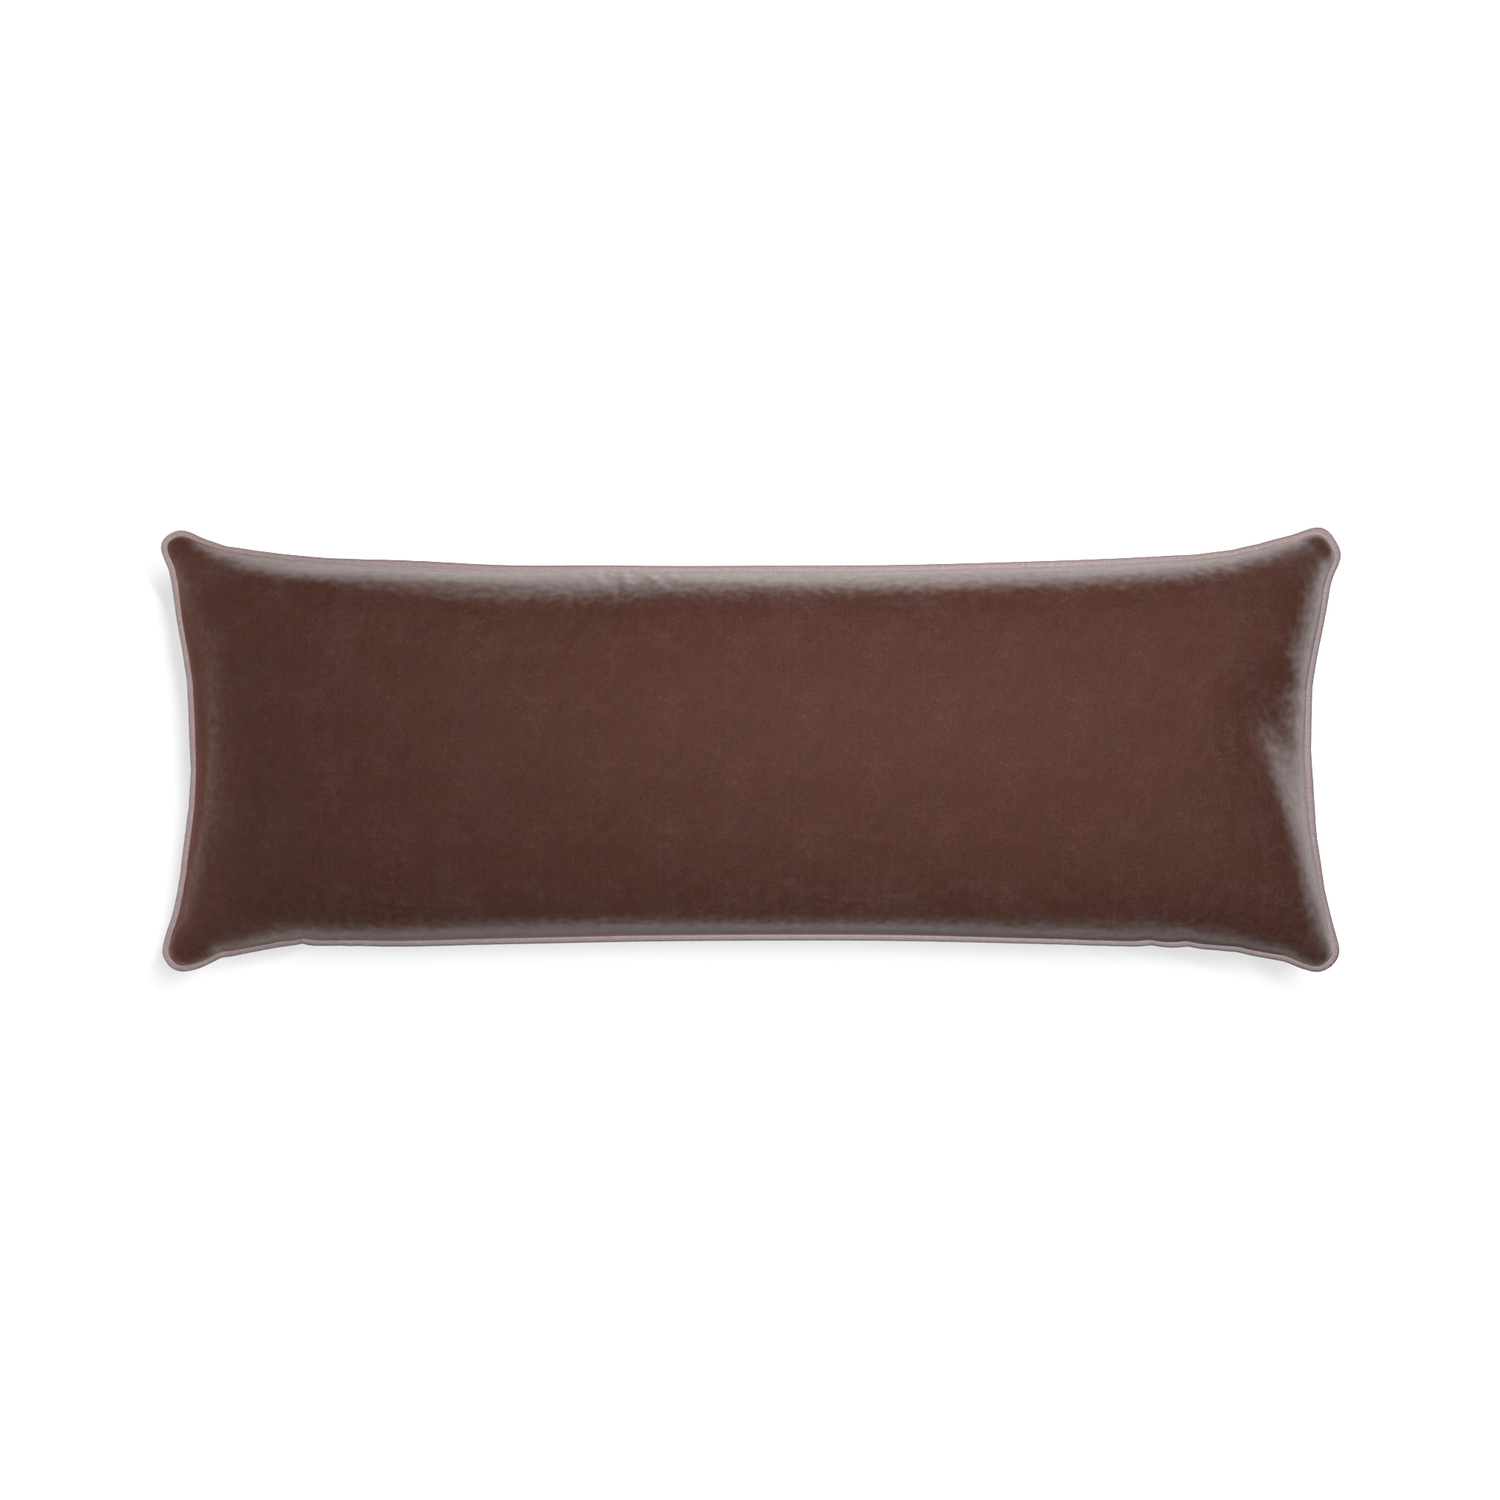 Xl-lumbar walnut velvet custom brownpillow with orchid piping on white background